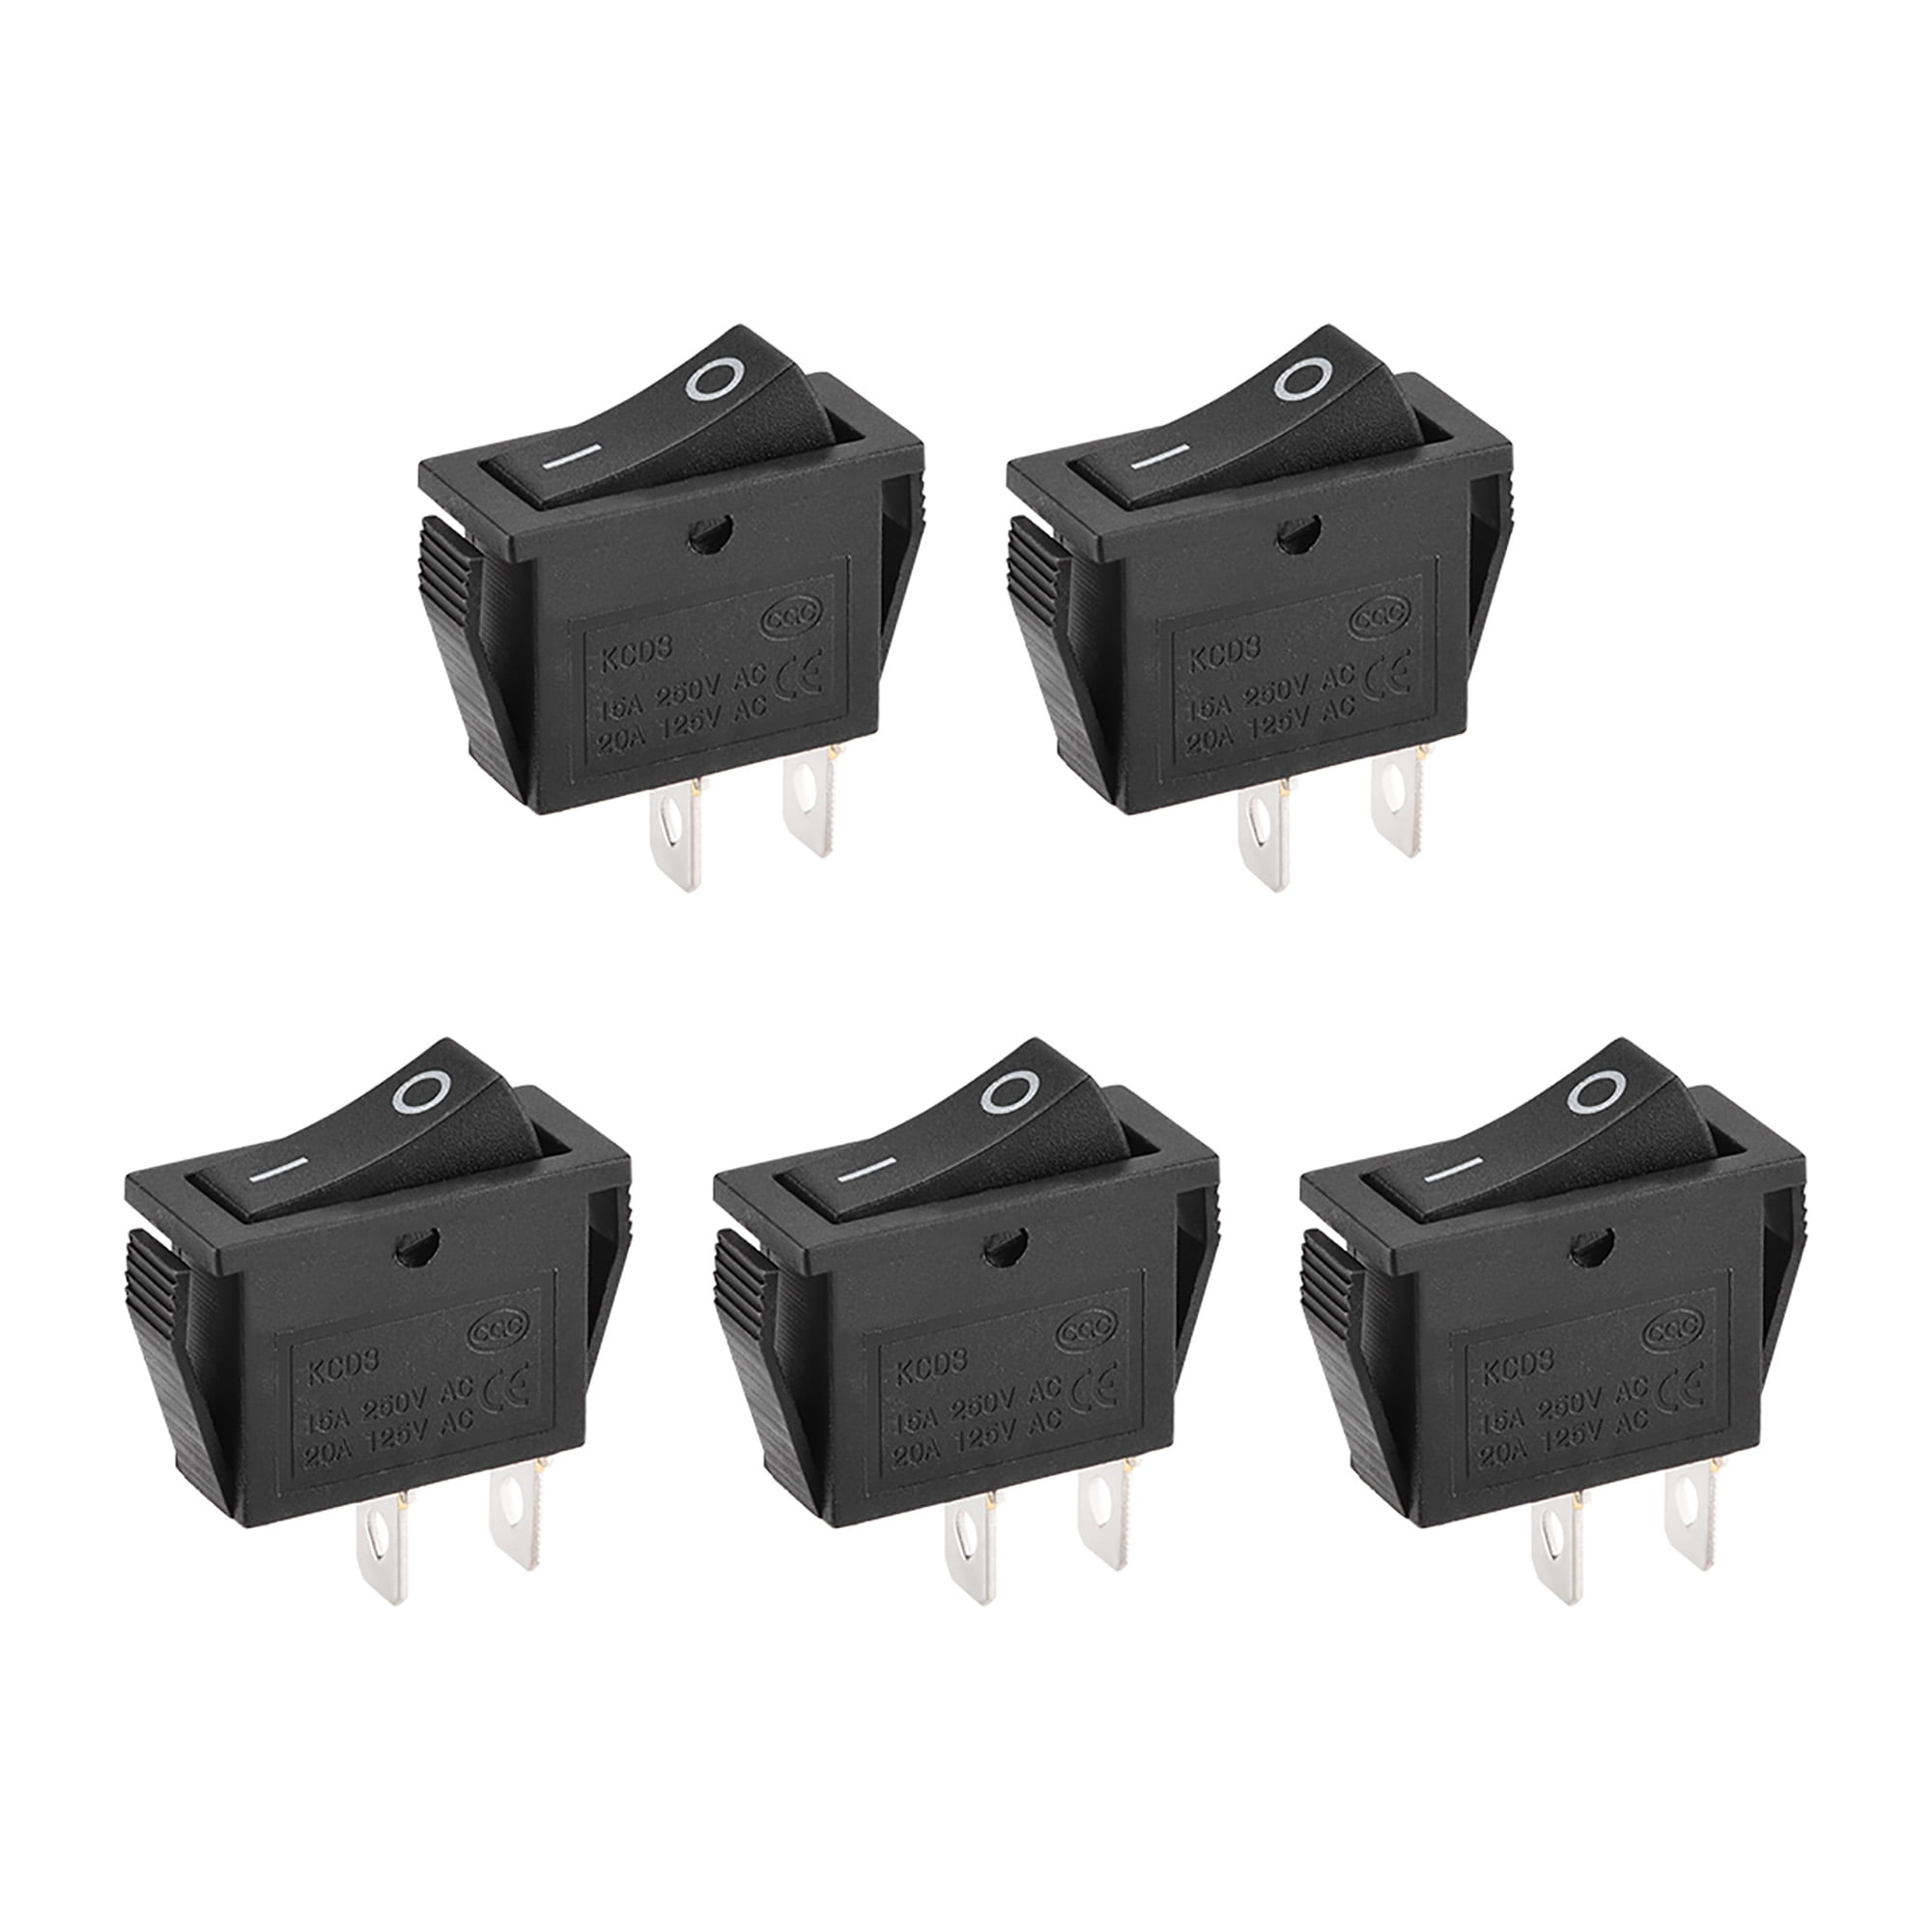 New Lot of 5 Switch ON-OFF White brown KCD3 6A 250VAC 2 Post 